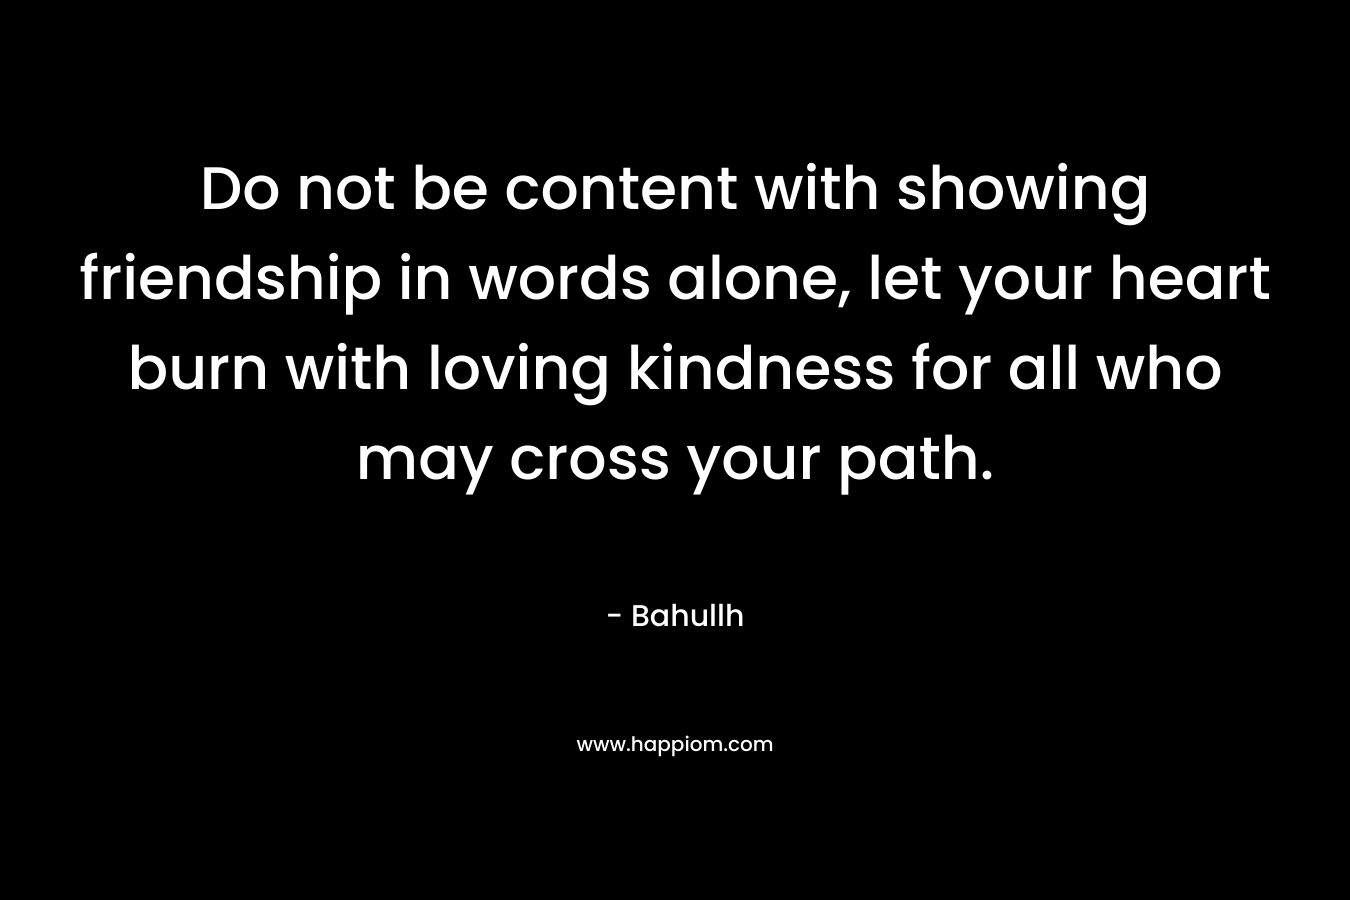 Do not be content with showing friendship in words alone, let your heart burn with loving kindness for all who may cross your path.